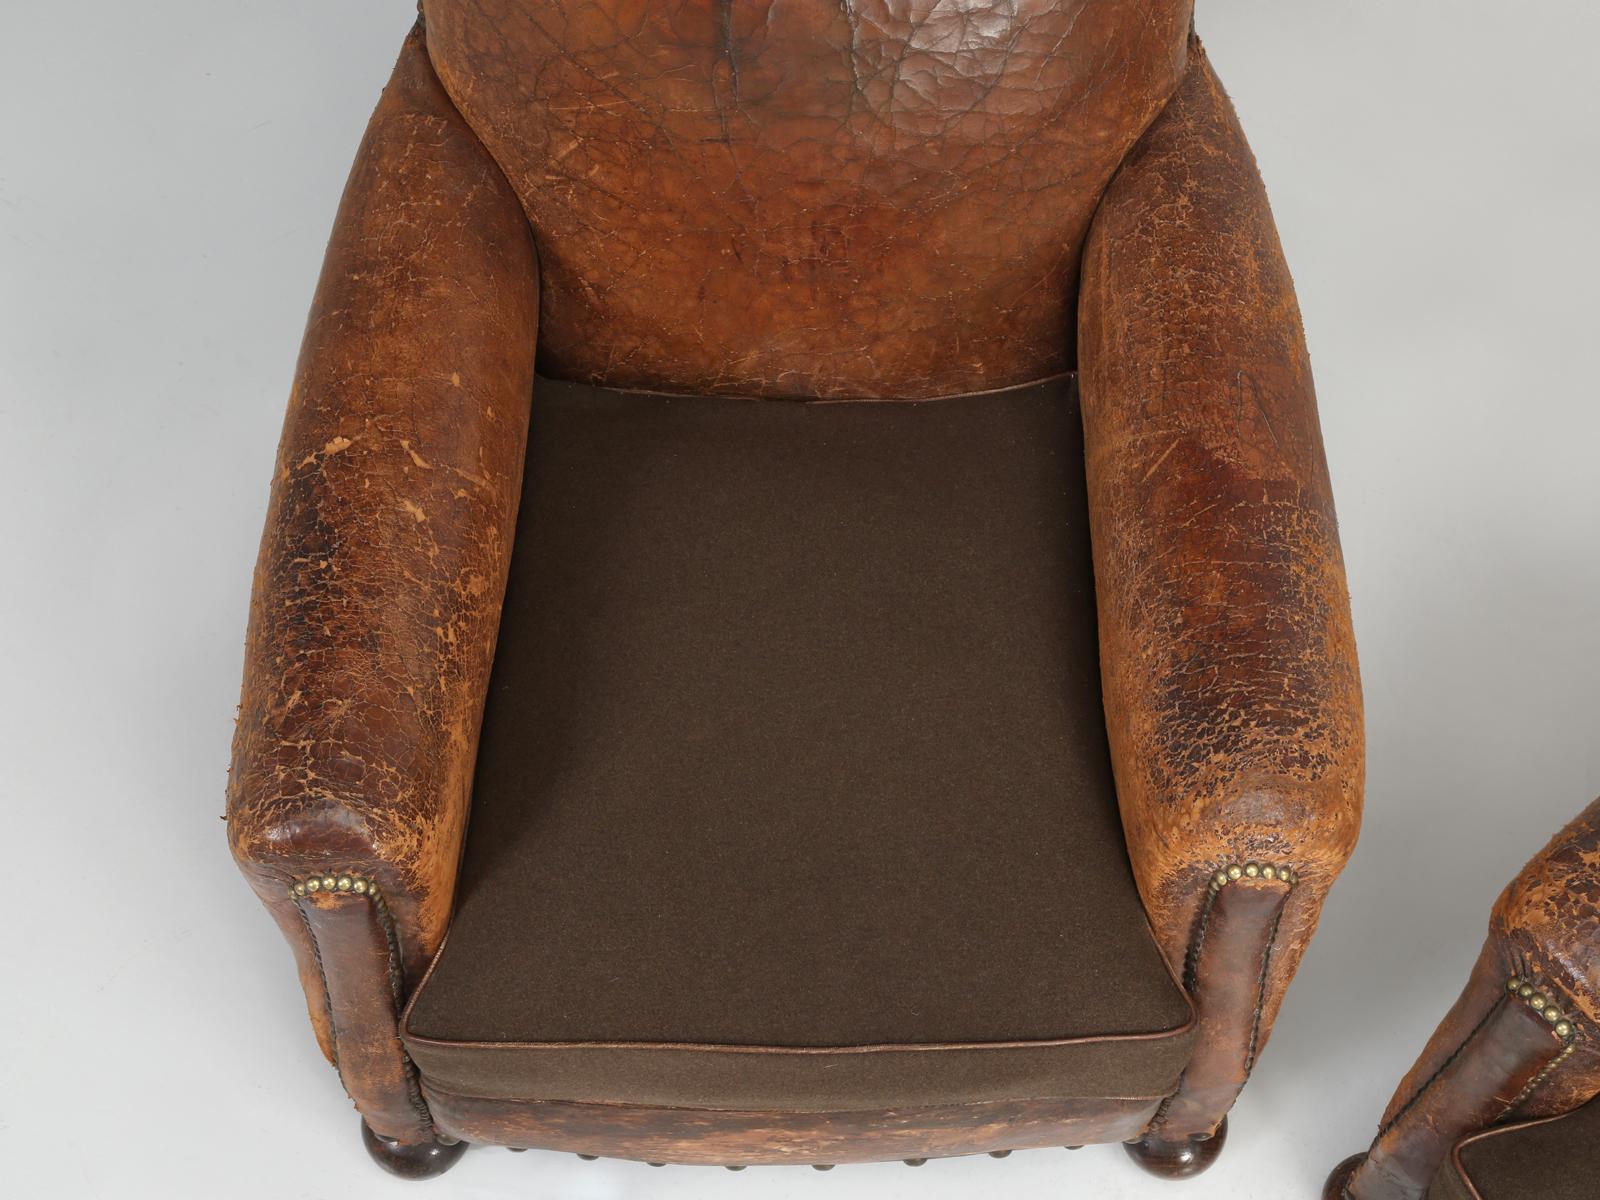 Hand-Crafted Antique Pair of French Leather Club Chairs from the 1920s Extensively Restored